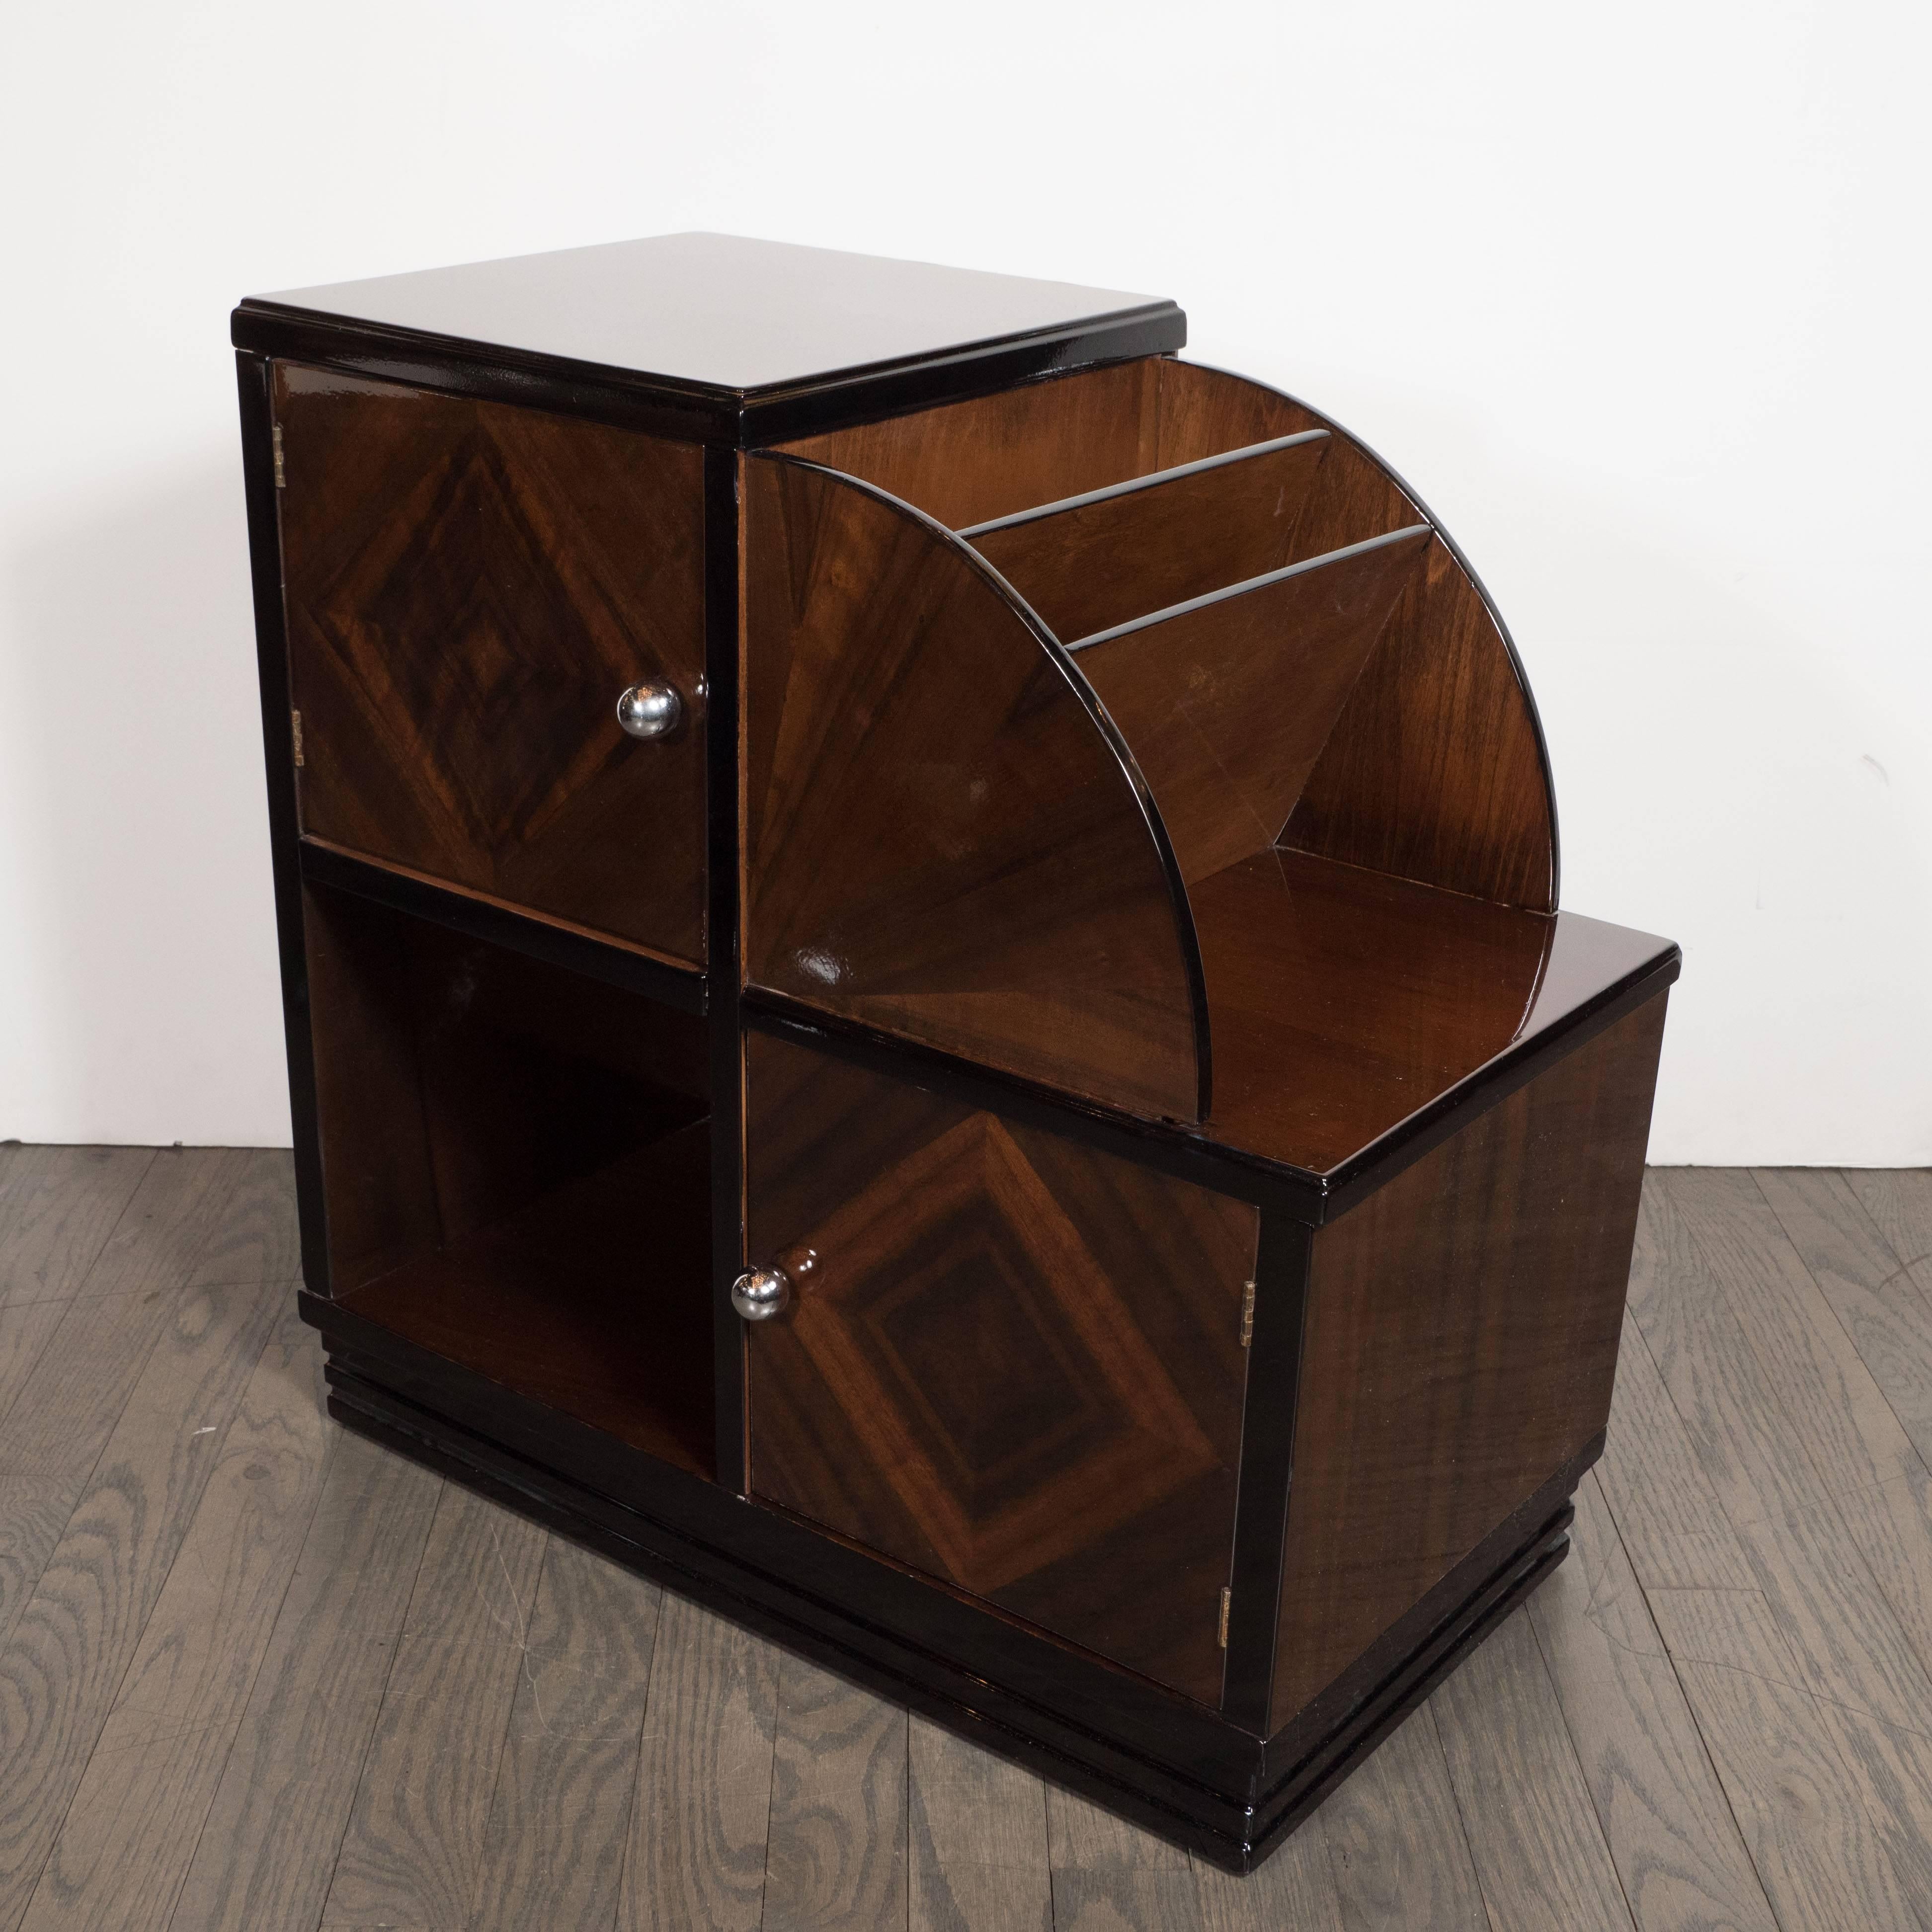 This stunning magazine stand was realized in the United States, circa 1935. It offers two cabinets with chrome pulls arranged caddy corner connected a square cut-out compartment on bottom and a demilune form on top with two shelves. There are two